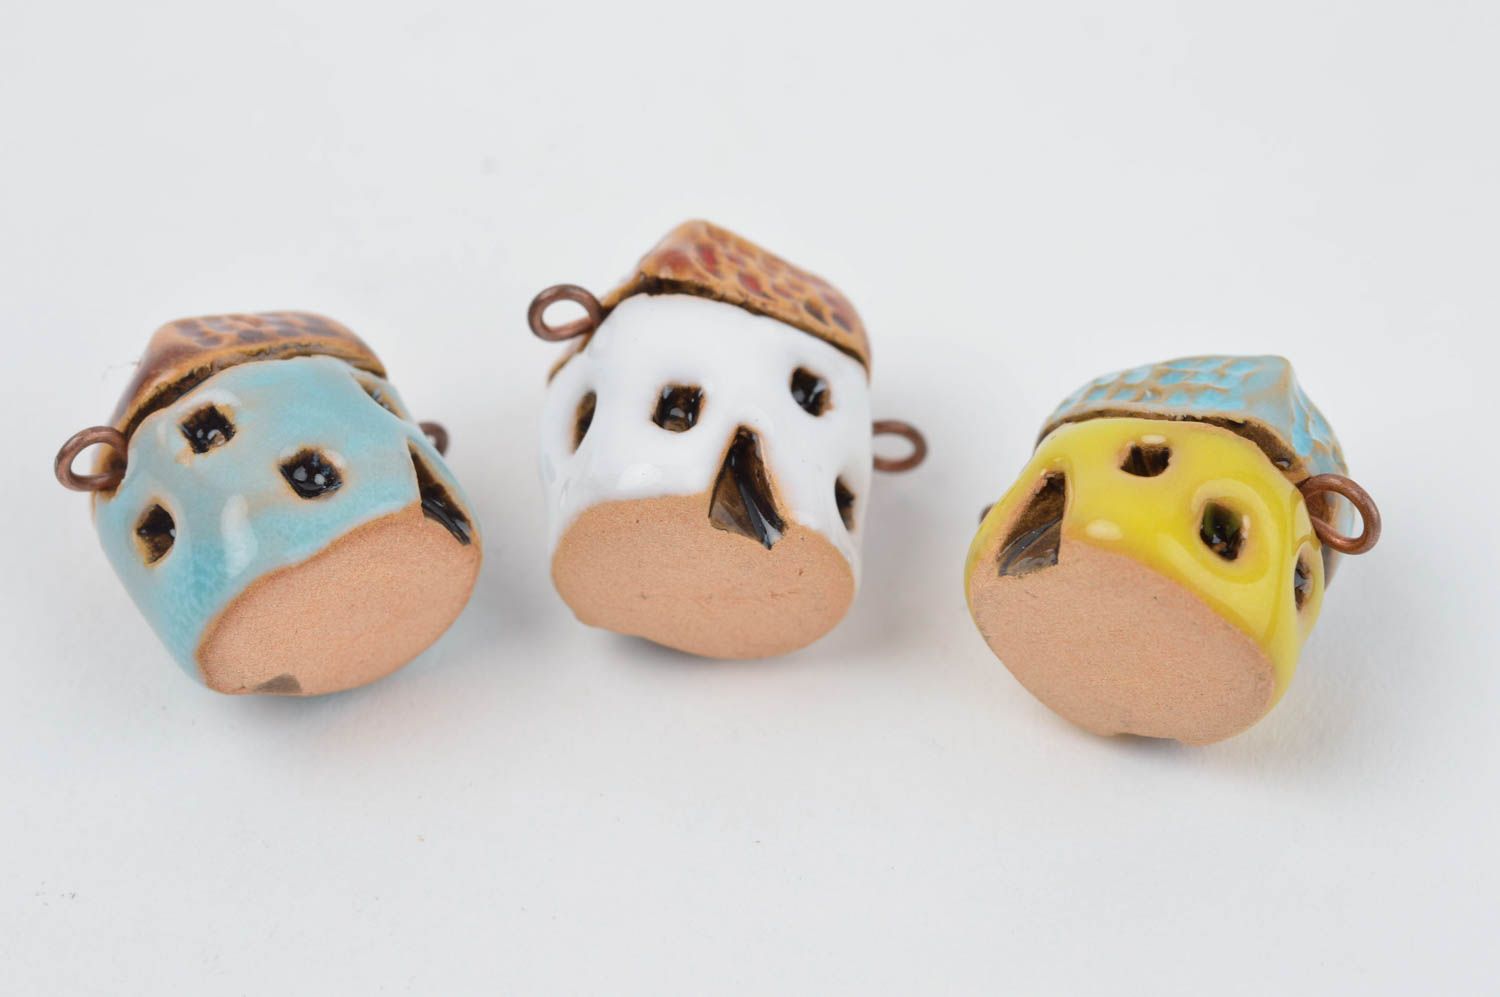 Painted handmade ceramic pendant 3 pieces neck accessories for girls gift ideas photo 2